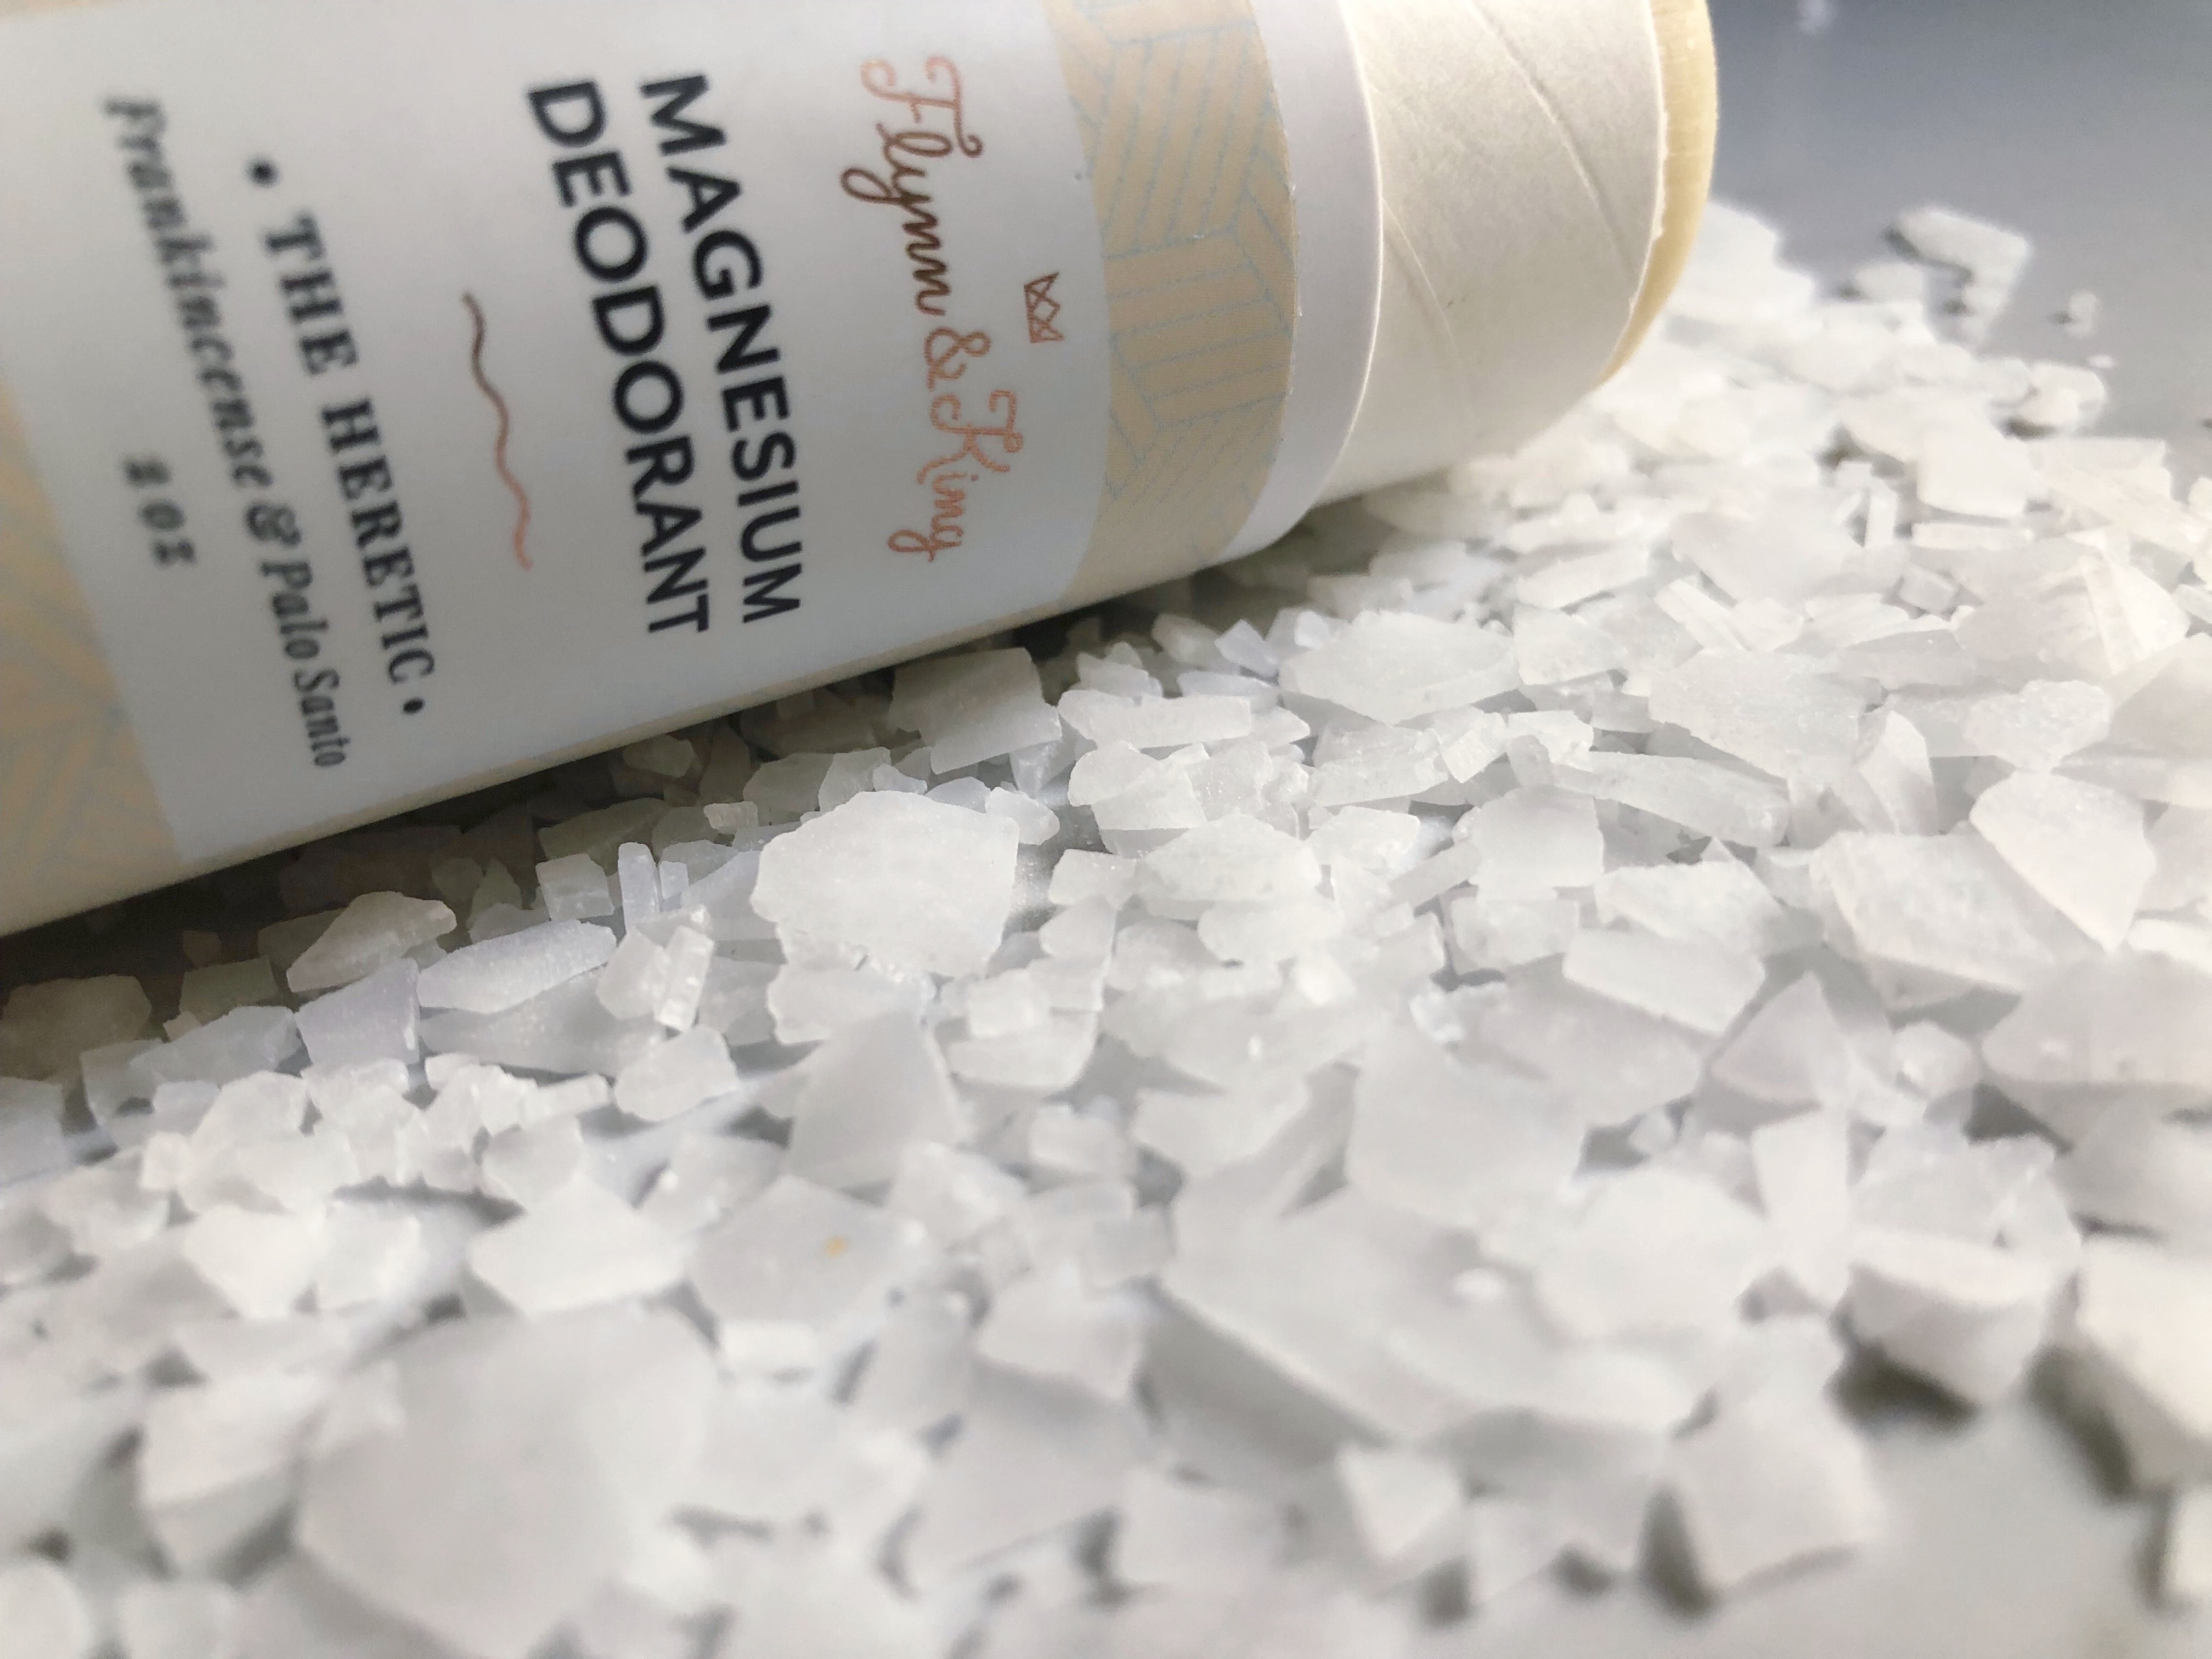 Magnesium Deodorant for Flynn and King - deodorant made without baking soda, The Heretic Frankincense and Palo Santo Deodorant